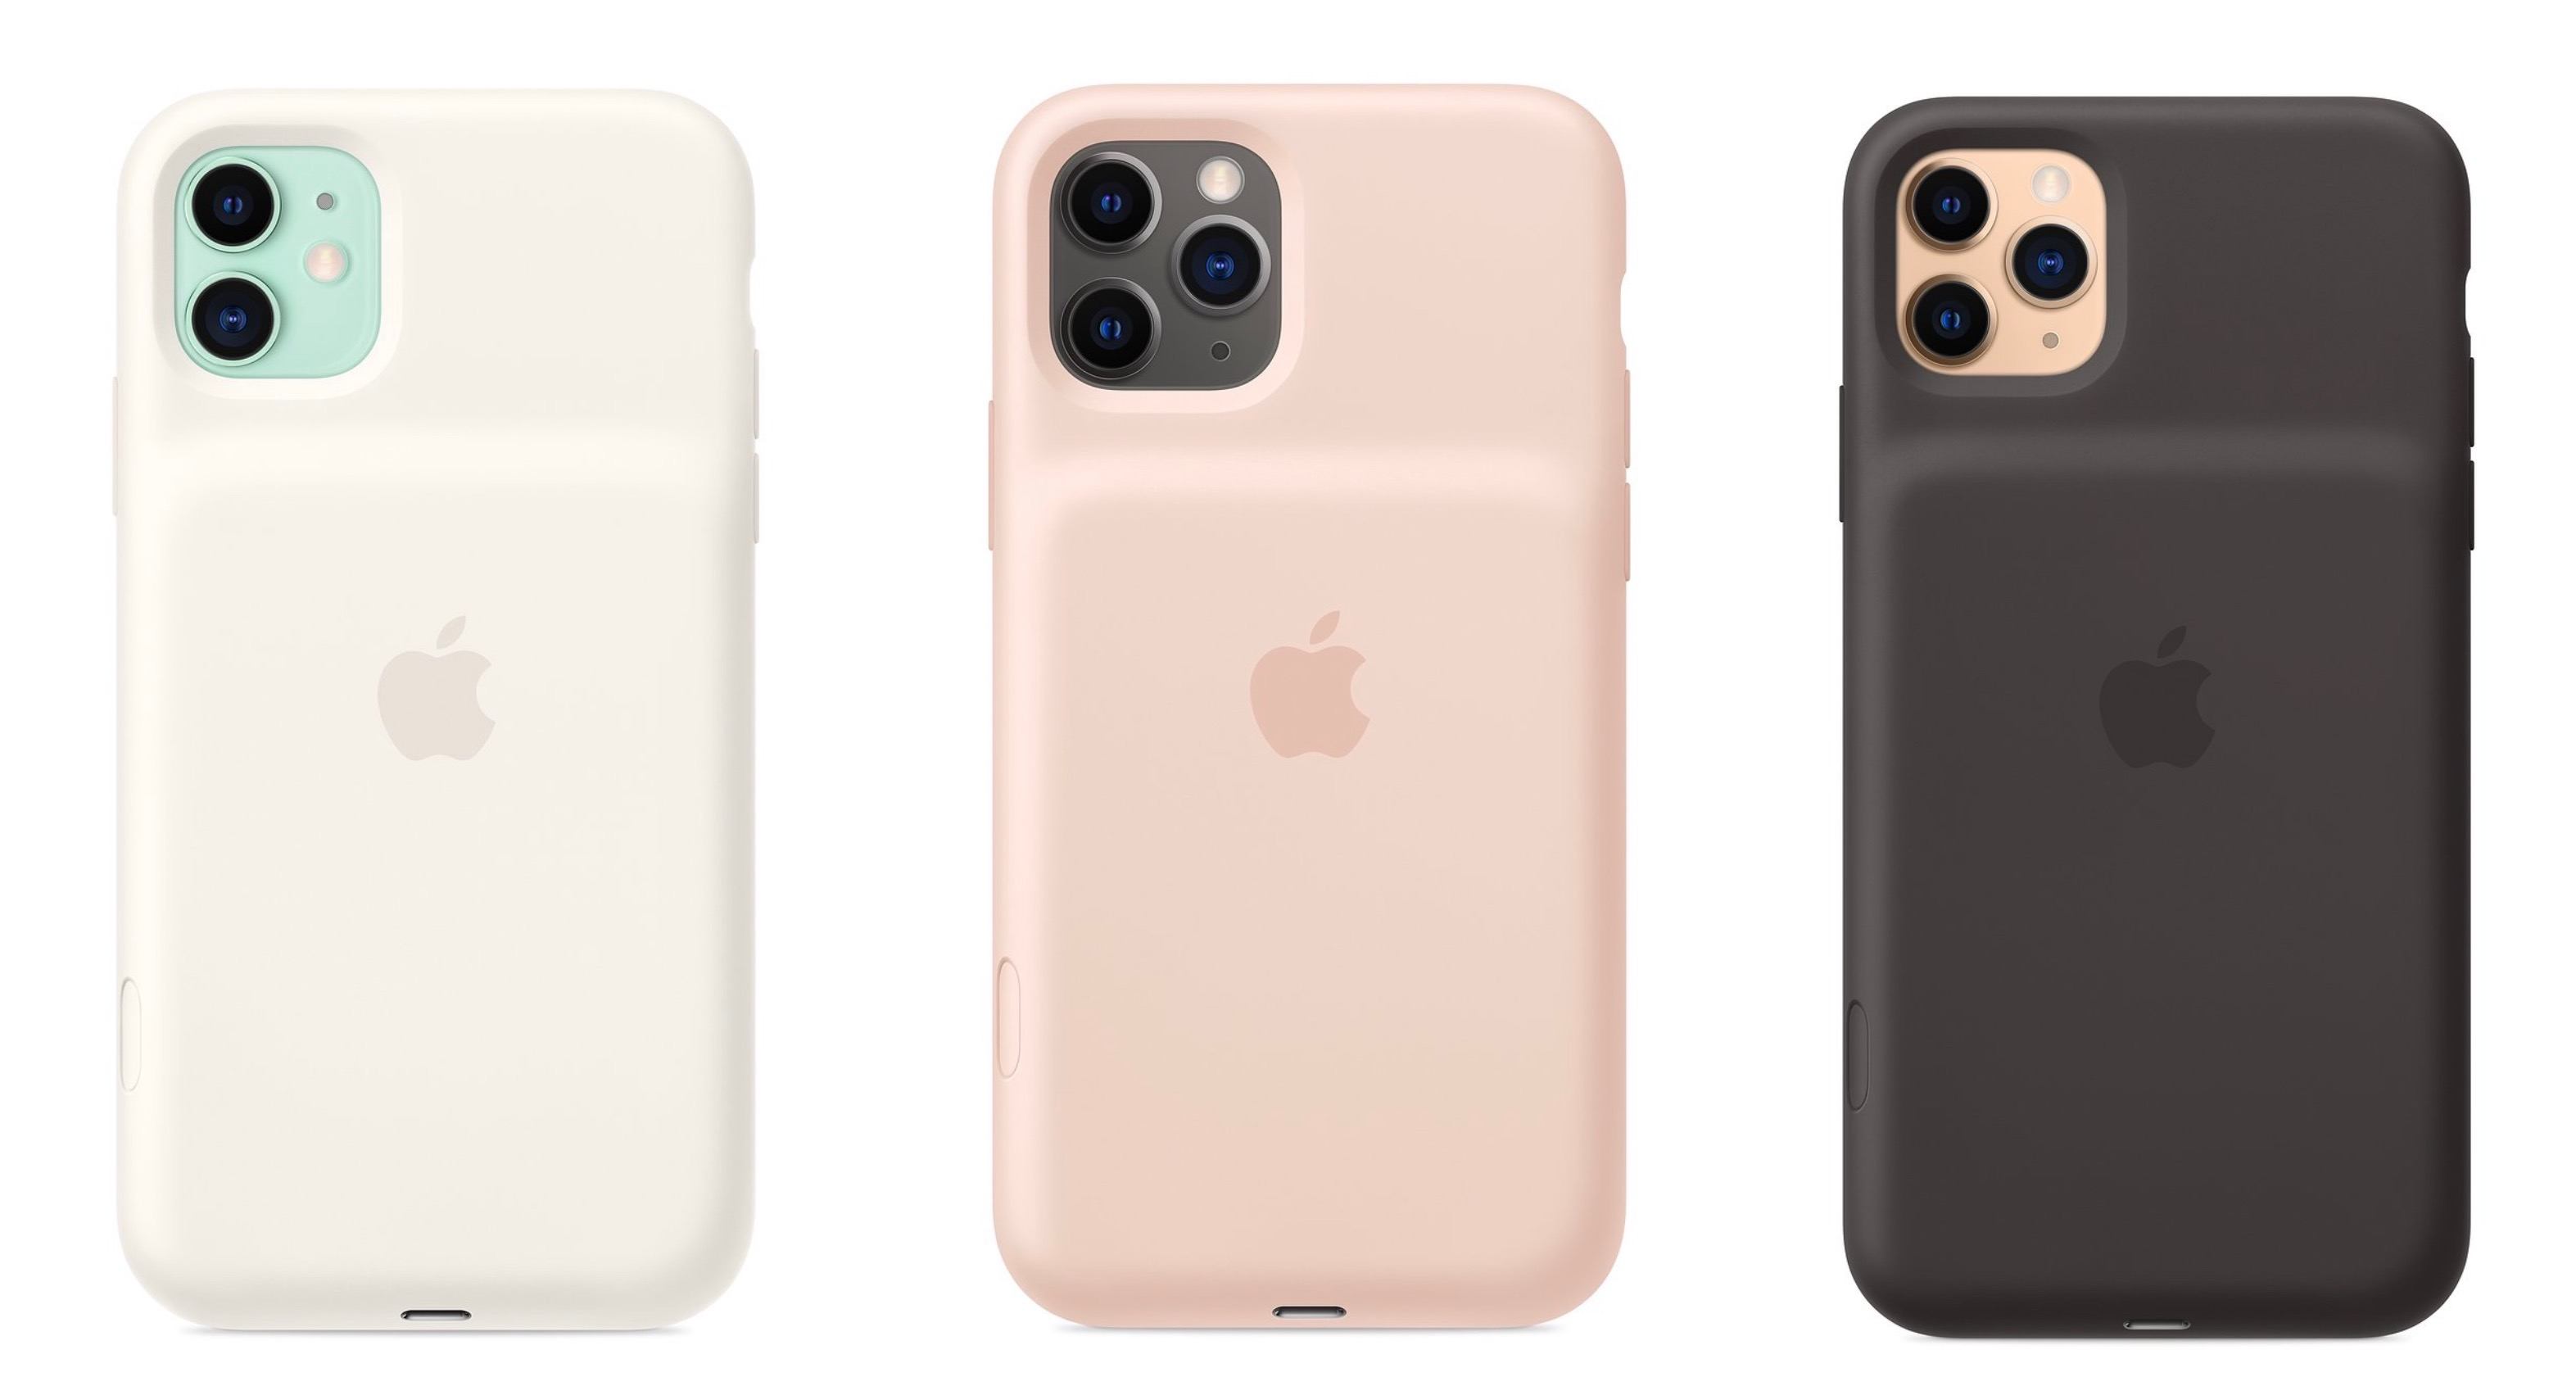 Apple Launched Battery Case To Support iPhone 11 Pro Camera Buttons